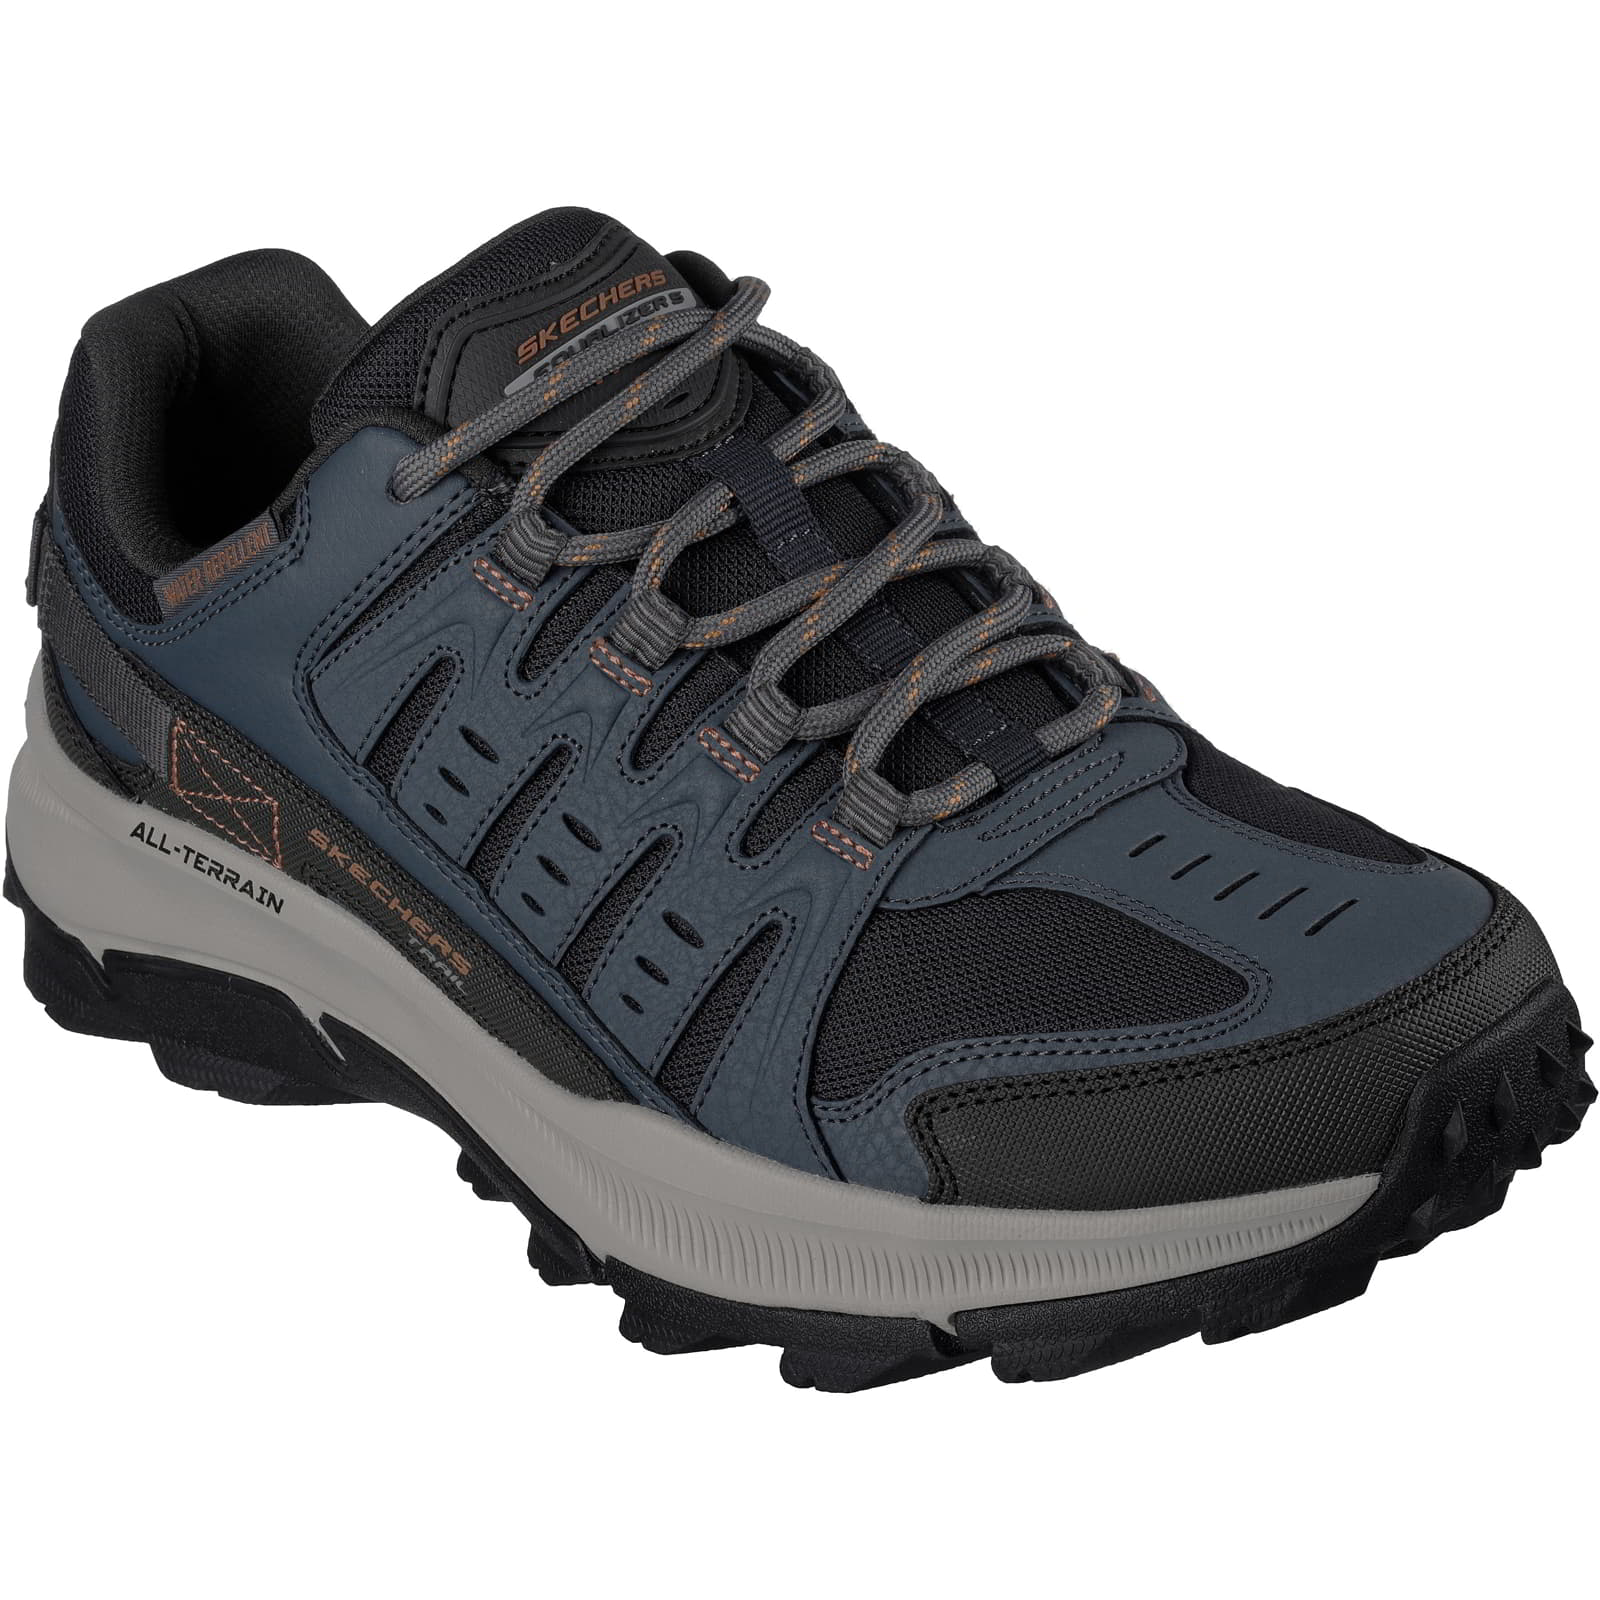 Skechers Men's Equalizer 5.0 Trail Water Repellent Walking Shoes Trainers - UK 9